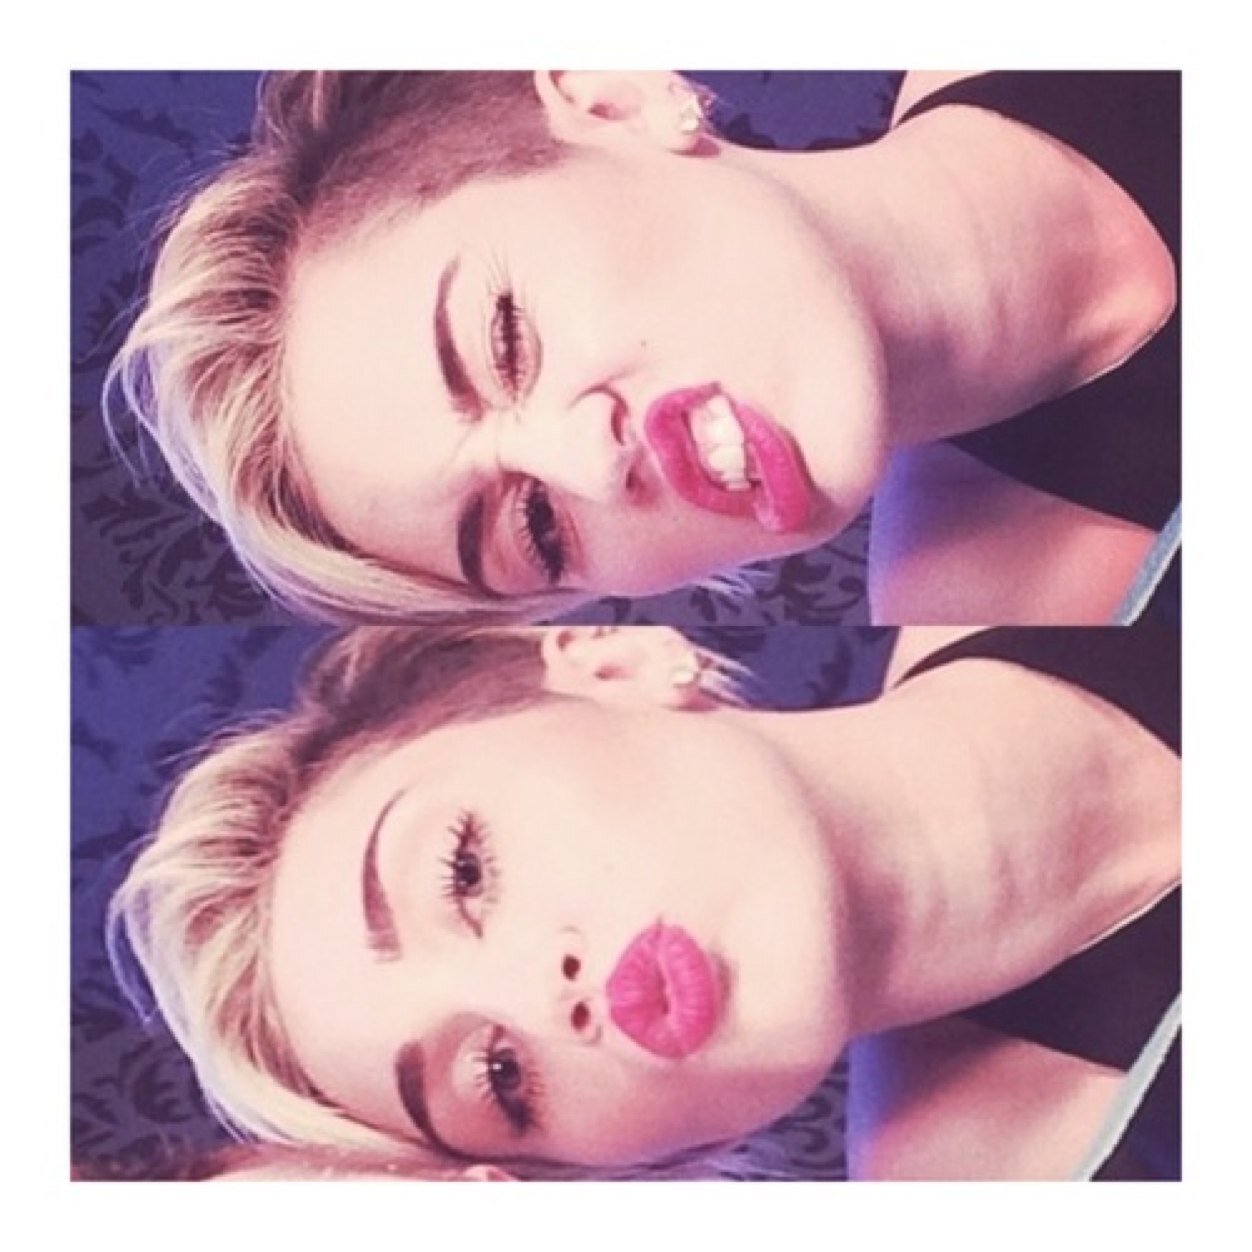 Eminem - Miley - Lana - Iggy A - Justin T - Ryan Gosling and Zayn's girl too • ICON made by me